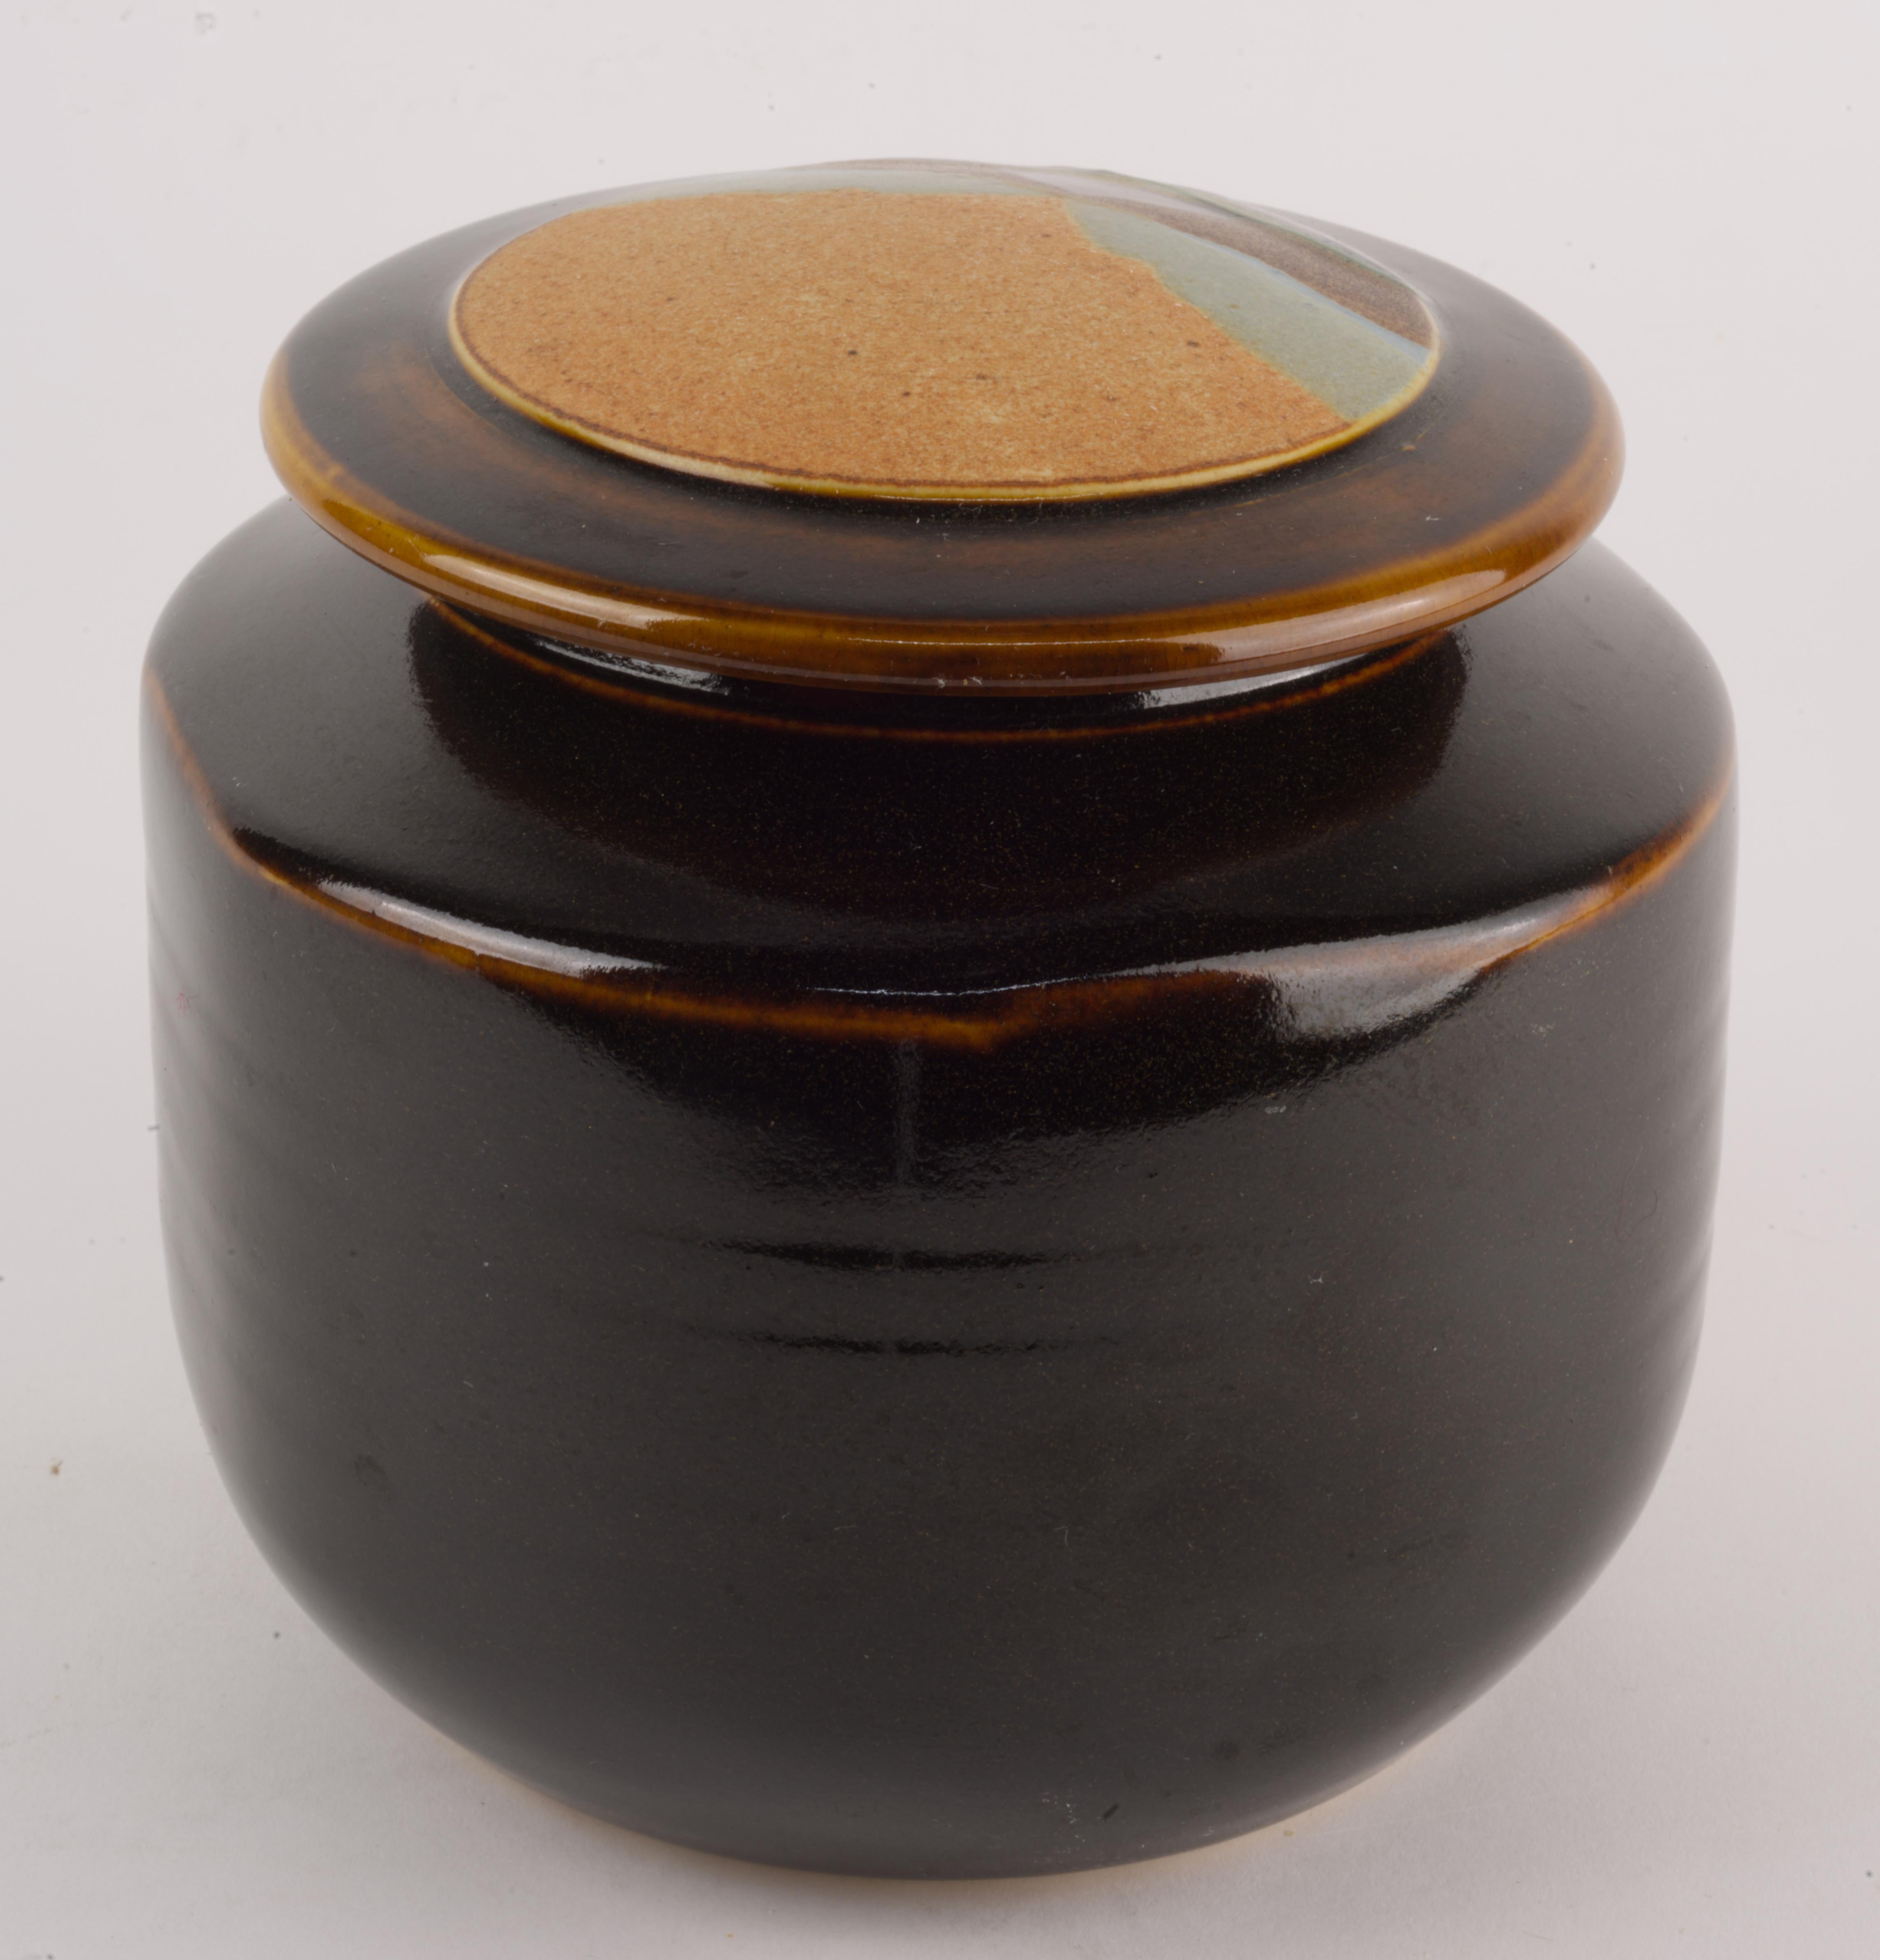 Organic Modern Rob Wiedmaier Covered Vessel Jar Organic Landscape Small For Sale